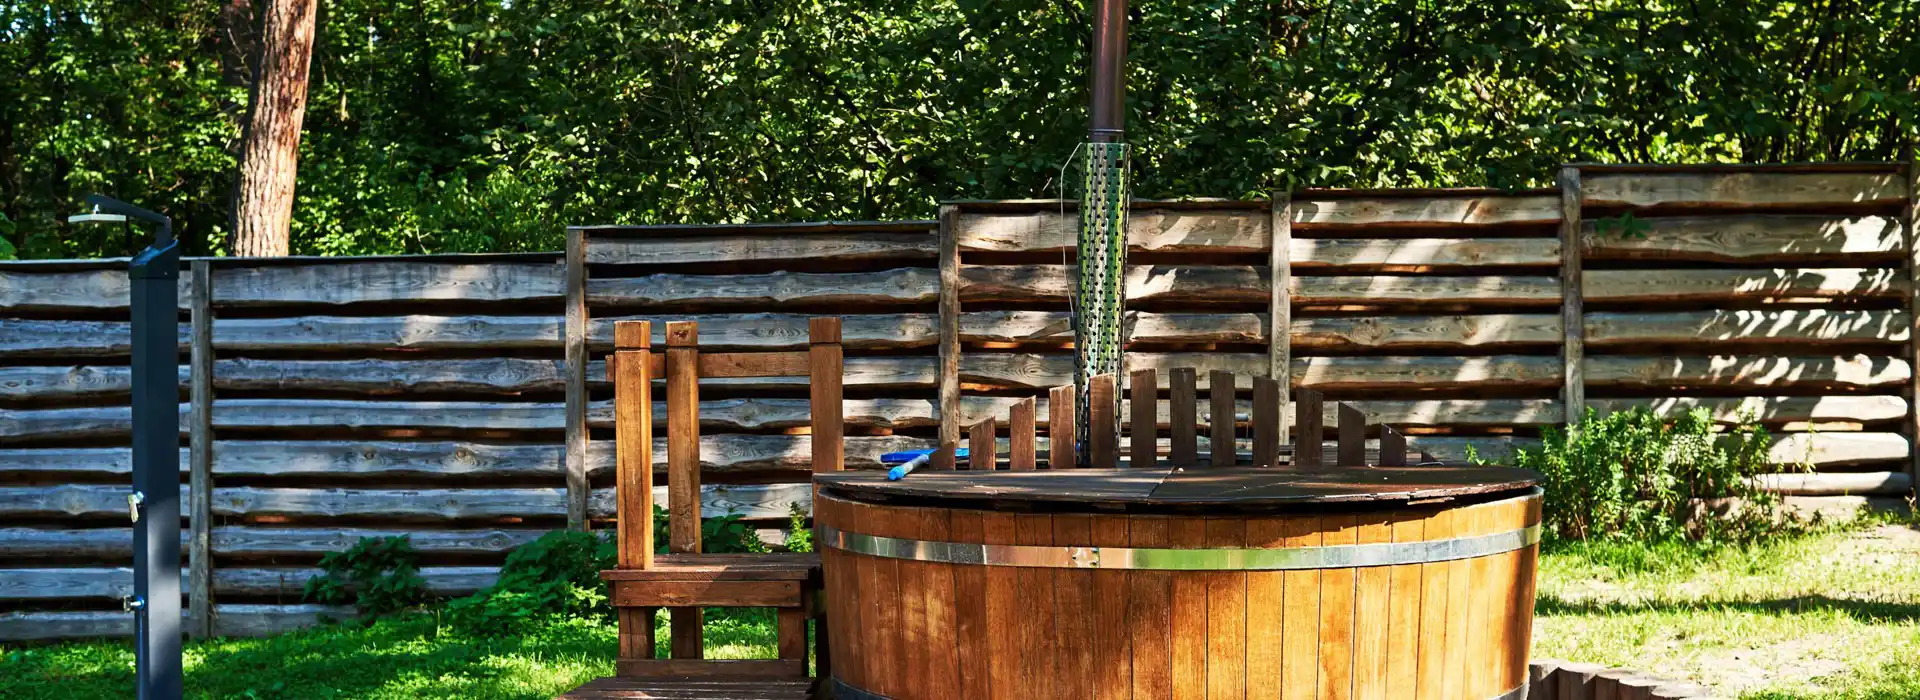 Derby camping and glamping pods with hot tubs